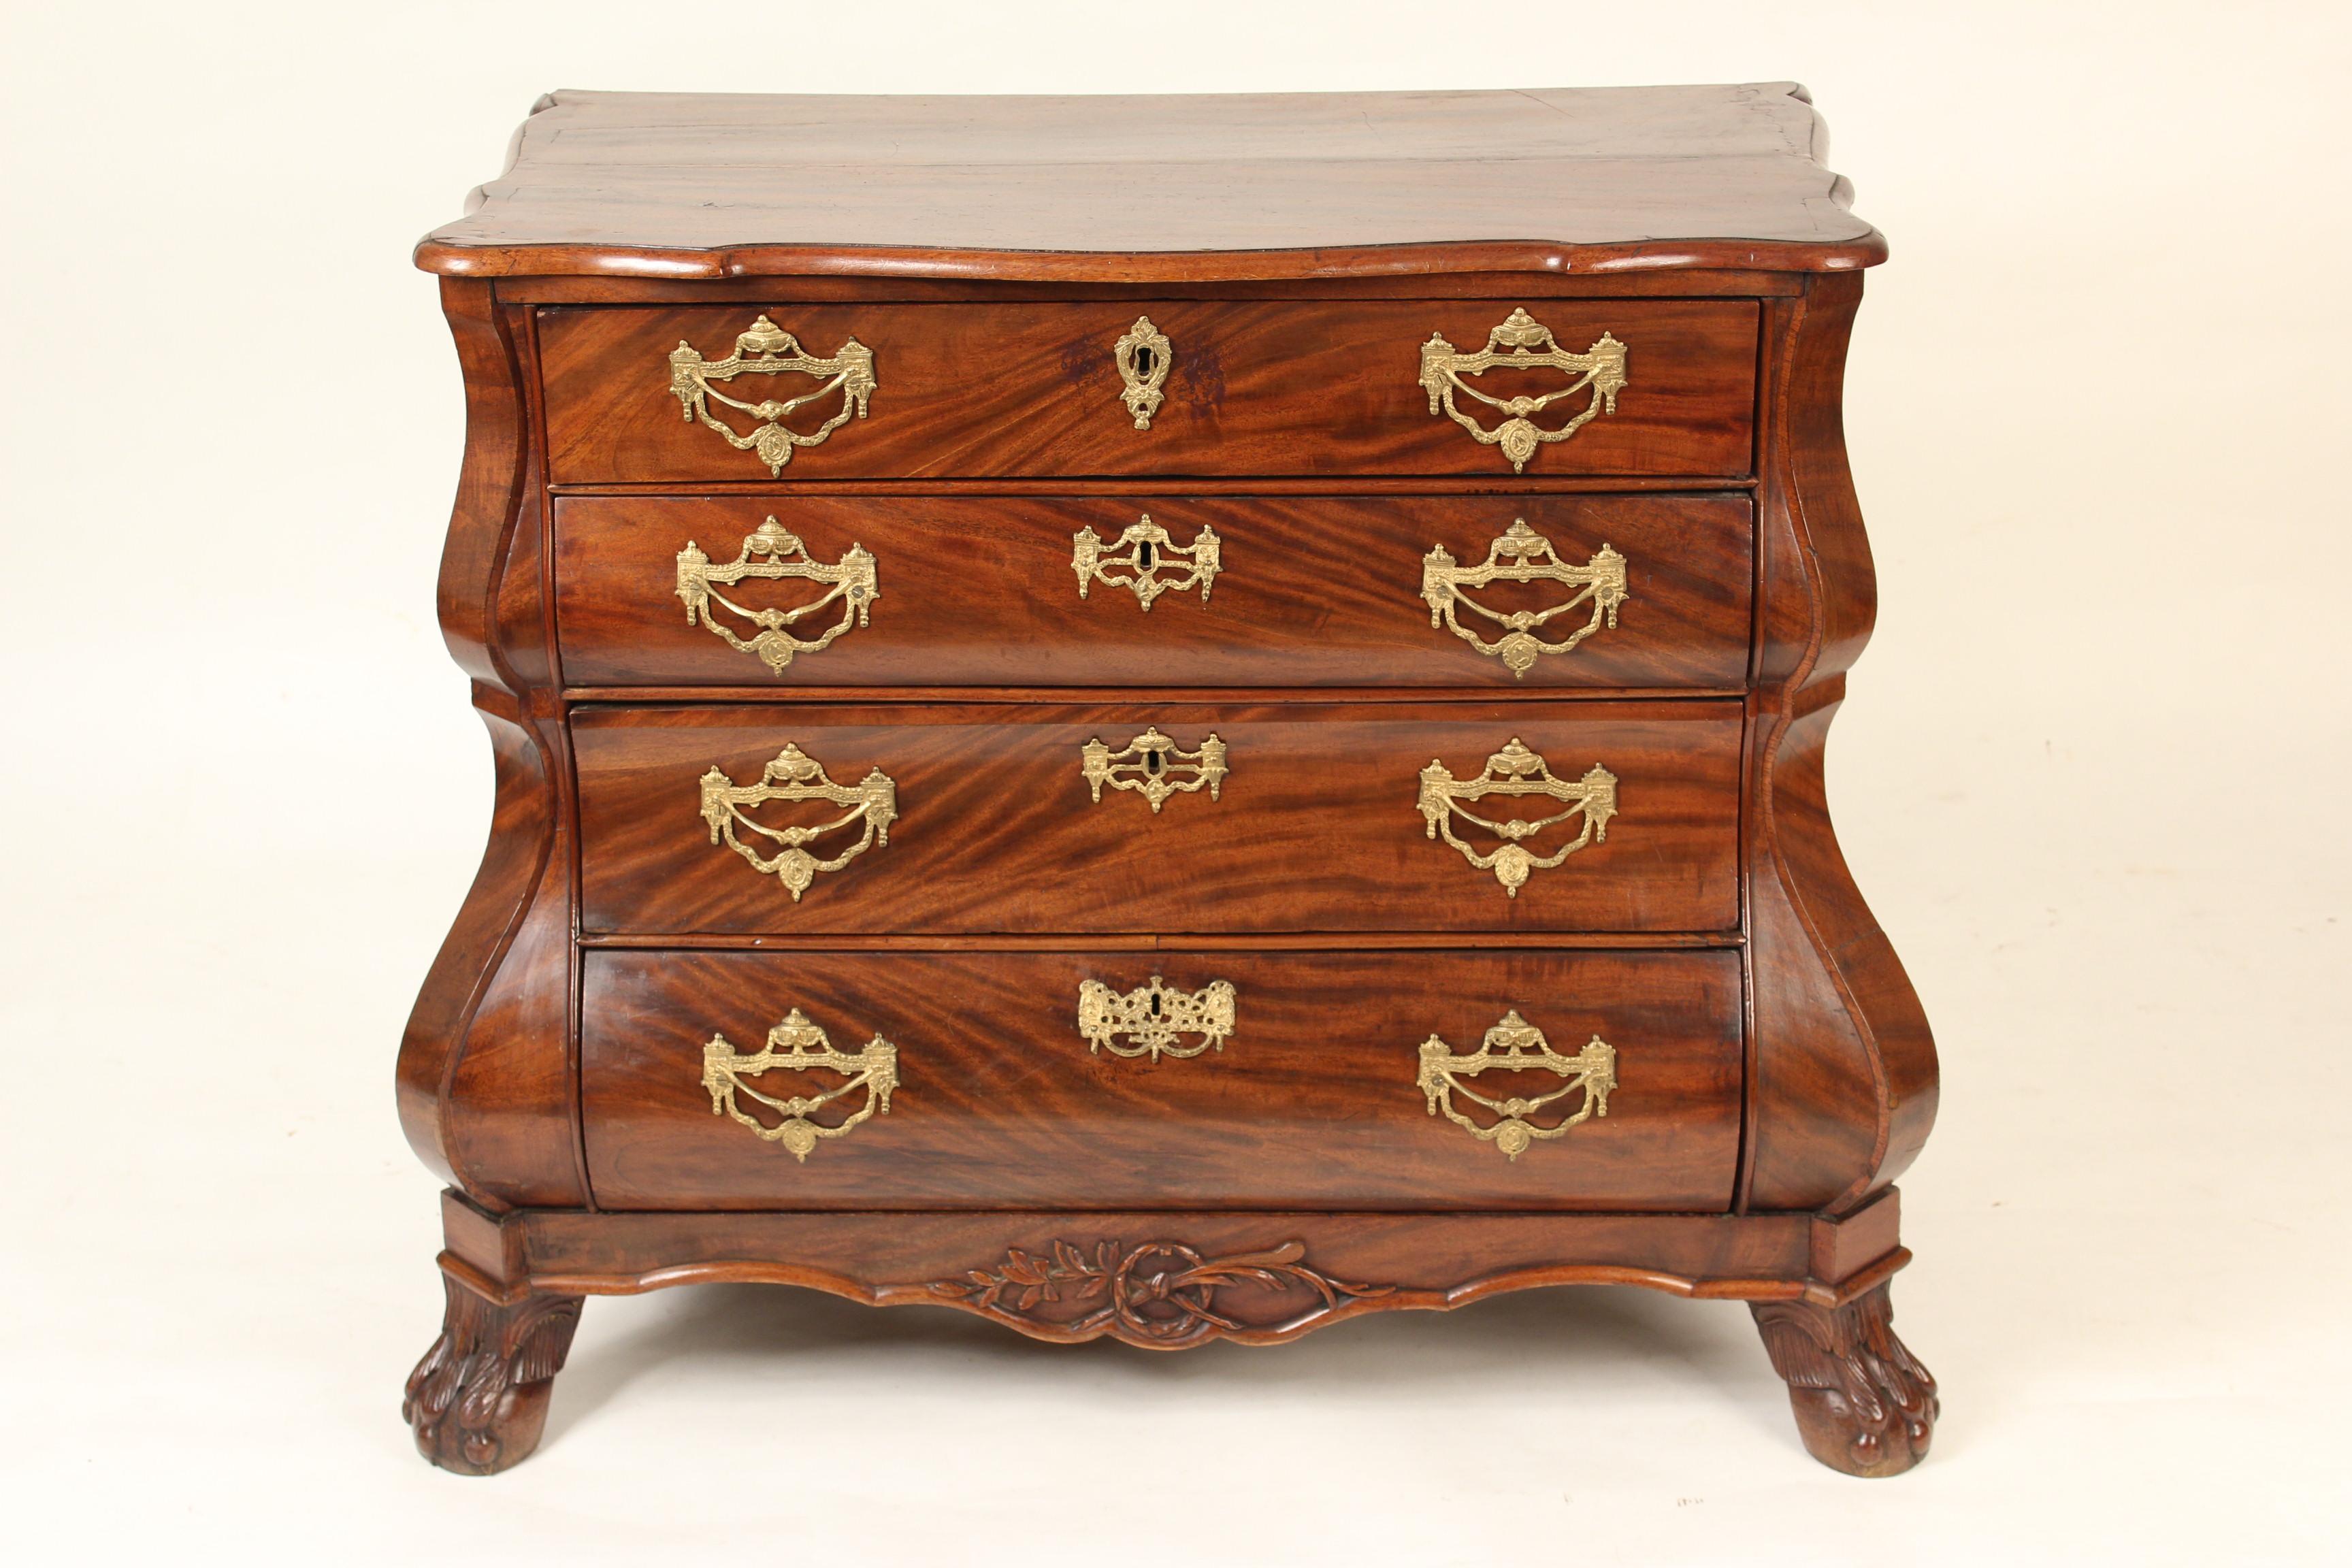 Dutch mahogany kettle base chest of drawers with brass hardware, 19th century. This chest has excellent quality mahogany and brass hardware.